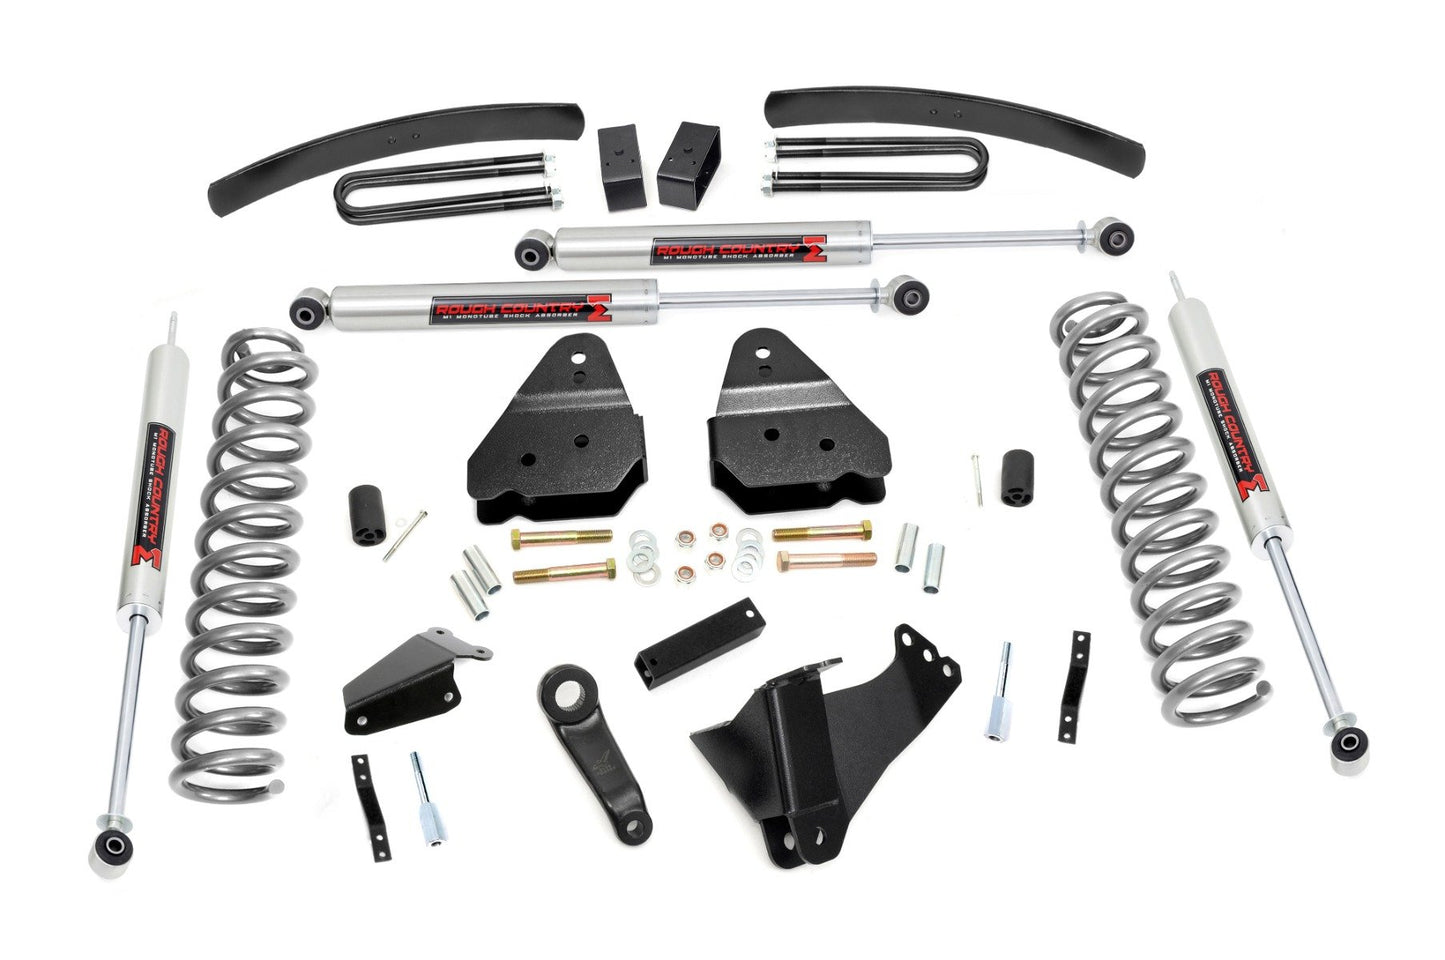 Rough Country 6 Inch Lift Kit | Gas | M1 | Ford F-250/F-350 Super Duty 4WD (2005-2007)